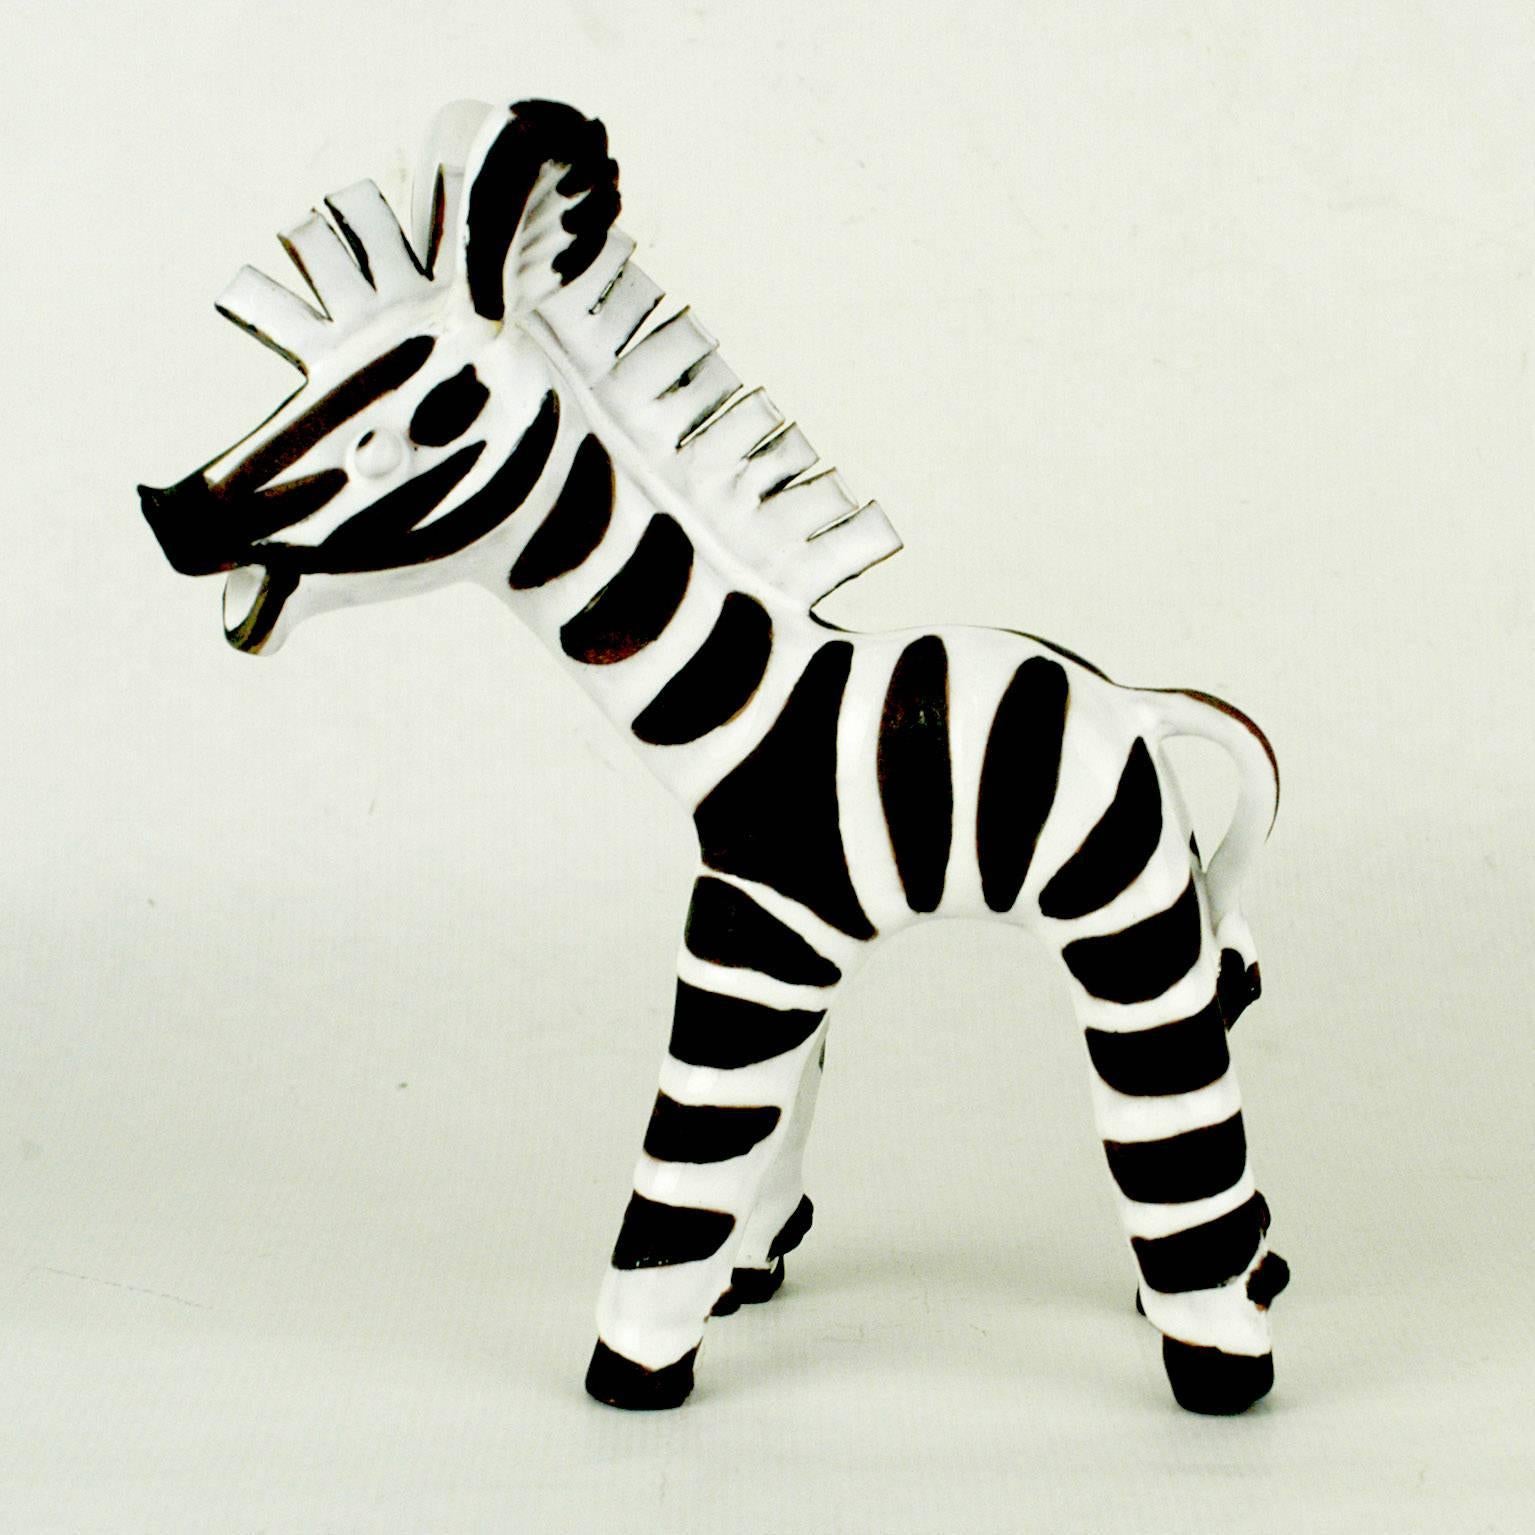 This charming humoristic Zebra sculpture has been designed and manufactured by the Viennese Midcentury artist Leopold Anzengruber. Born in 1912 he founded his own company Anzengruber Keramik Wien in 1949 where he created his rich oeuvre, very well